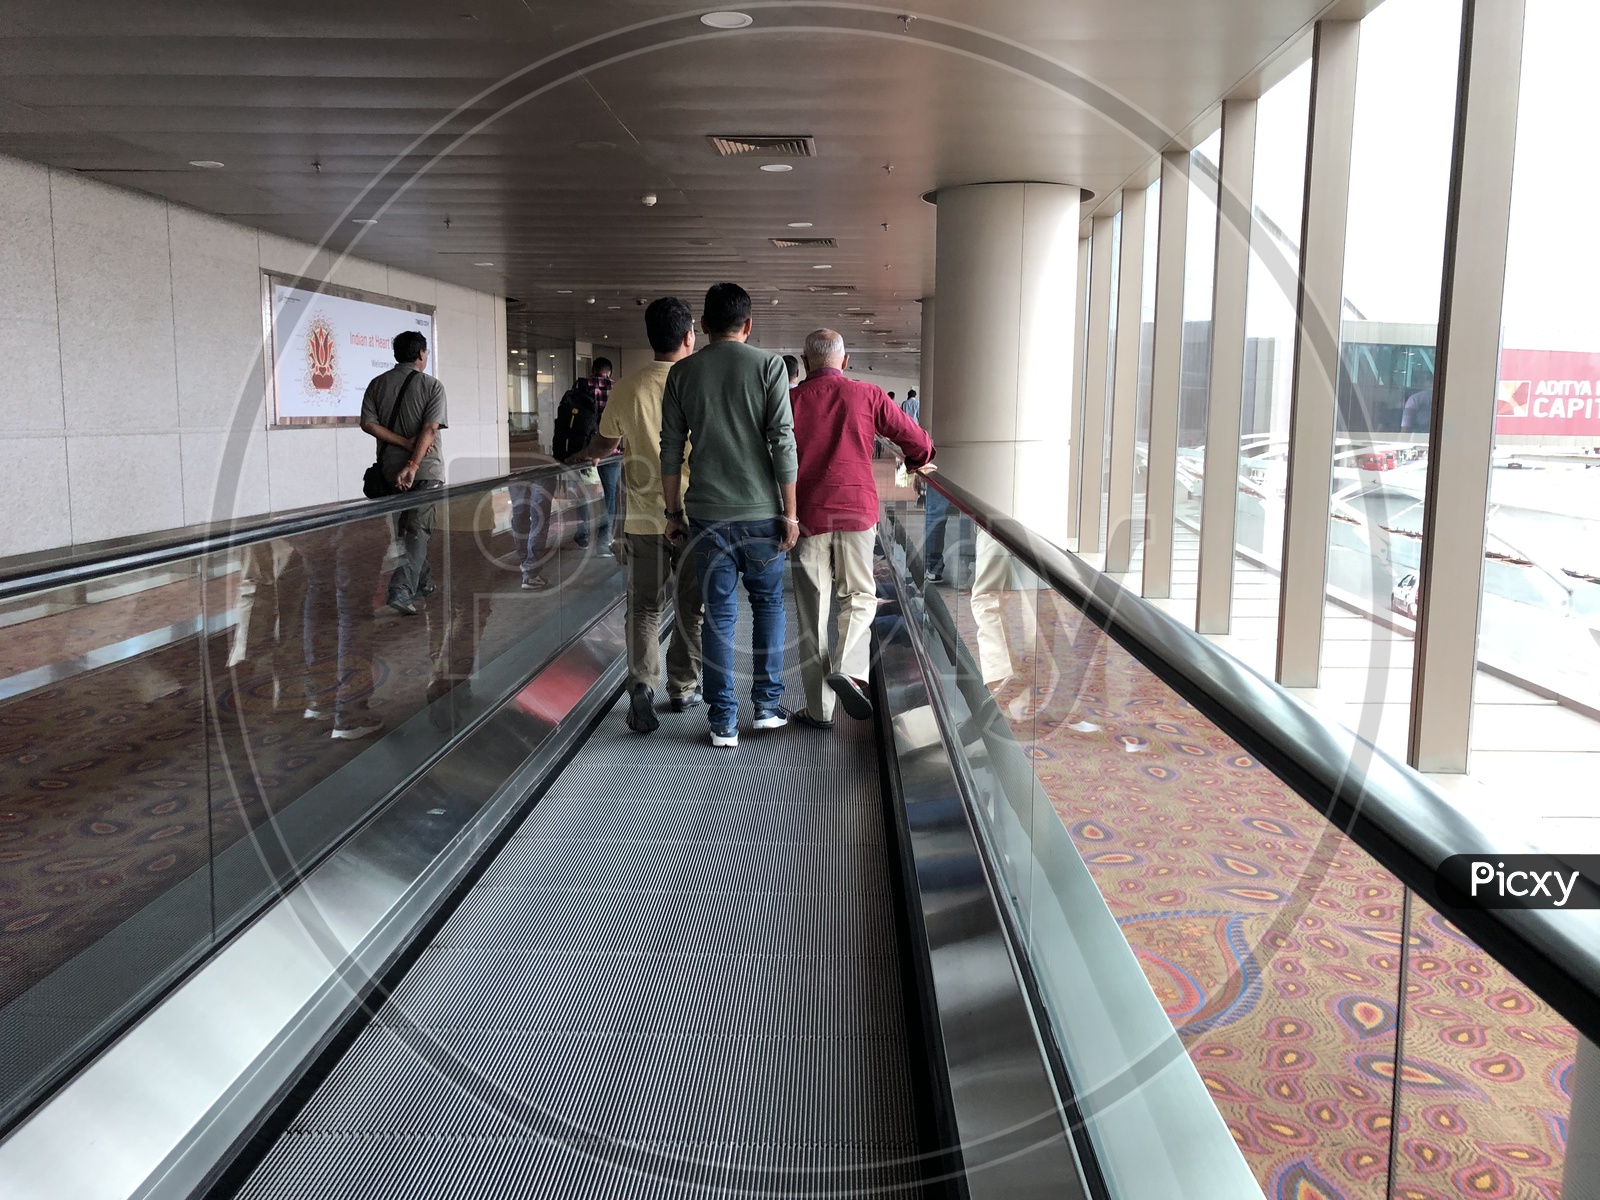 Flat Escalators in Airport With Passengers